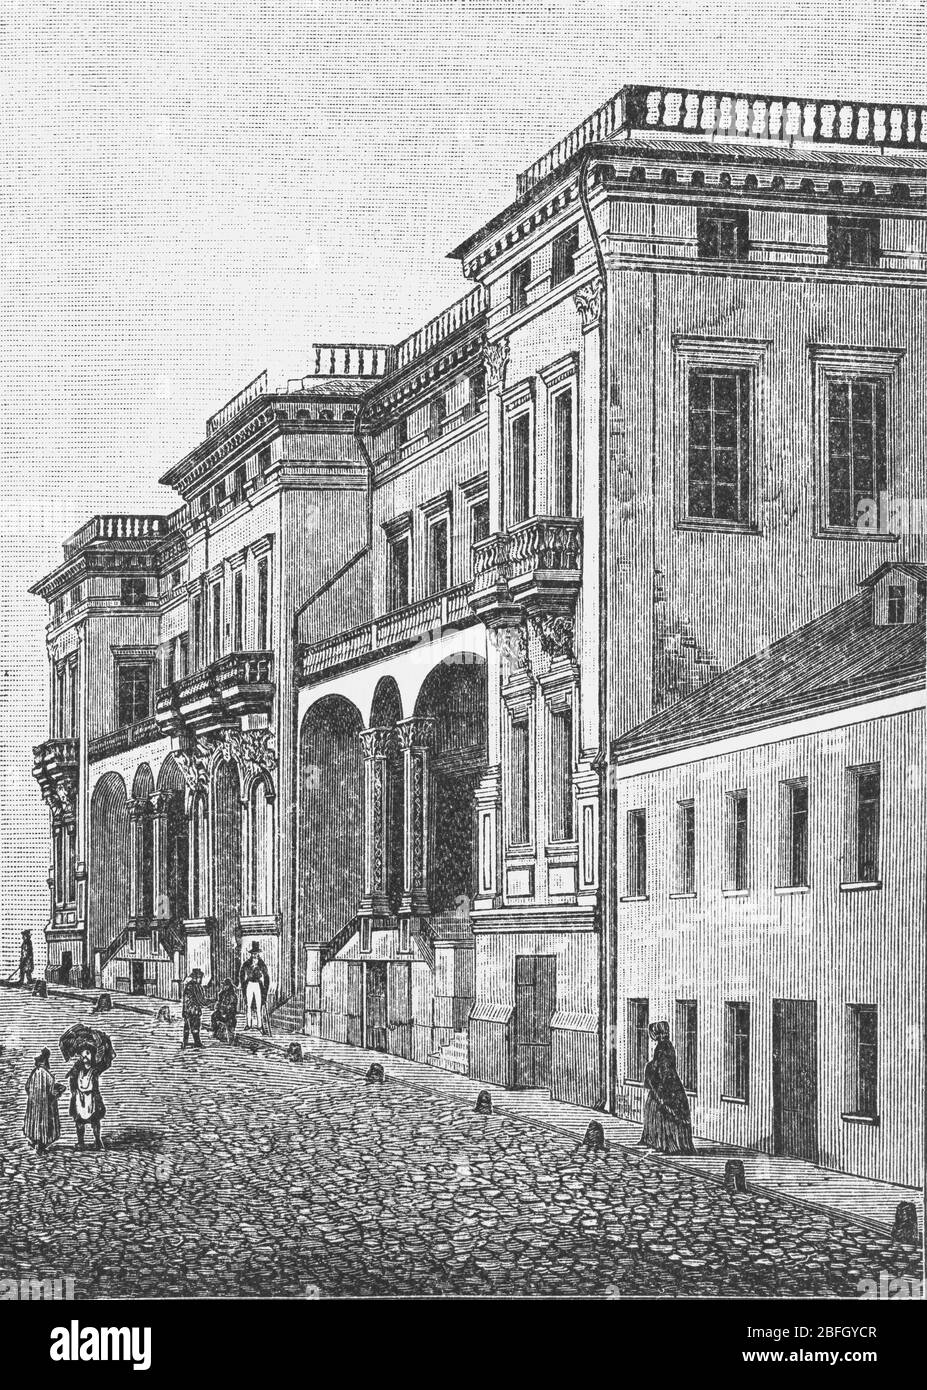 Prince Gagarin house in Moscow, Tverskaya street, 18th century, illustration from book dated 1916 Stock Photo